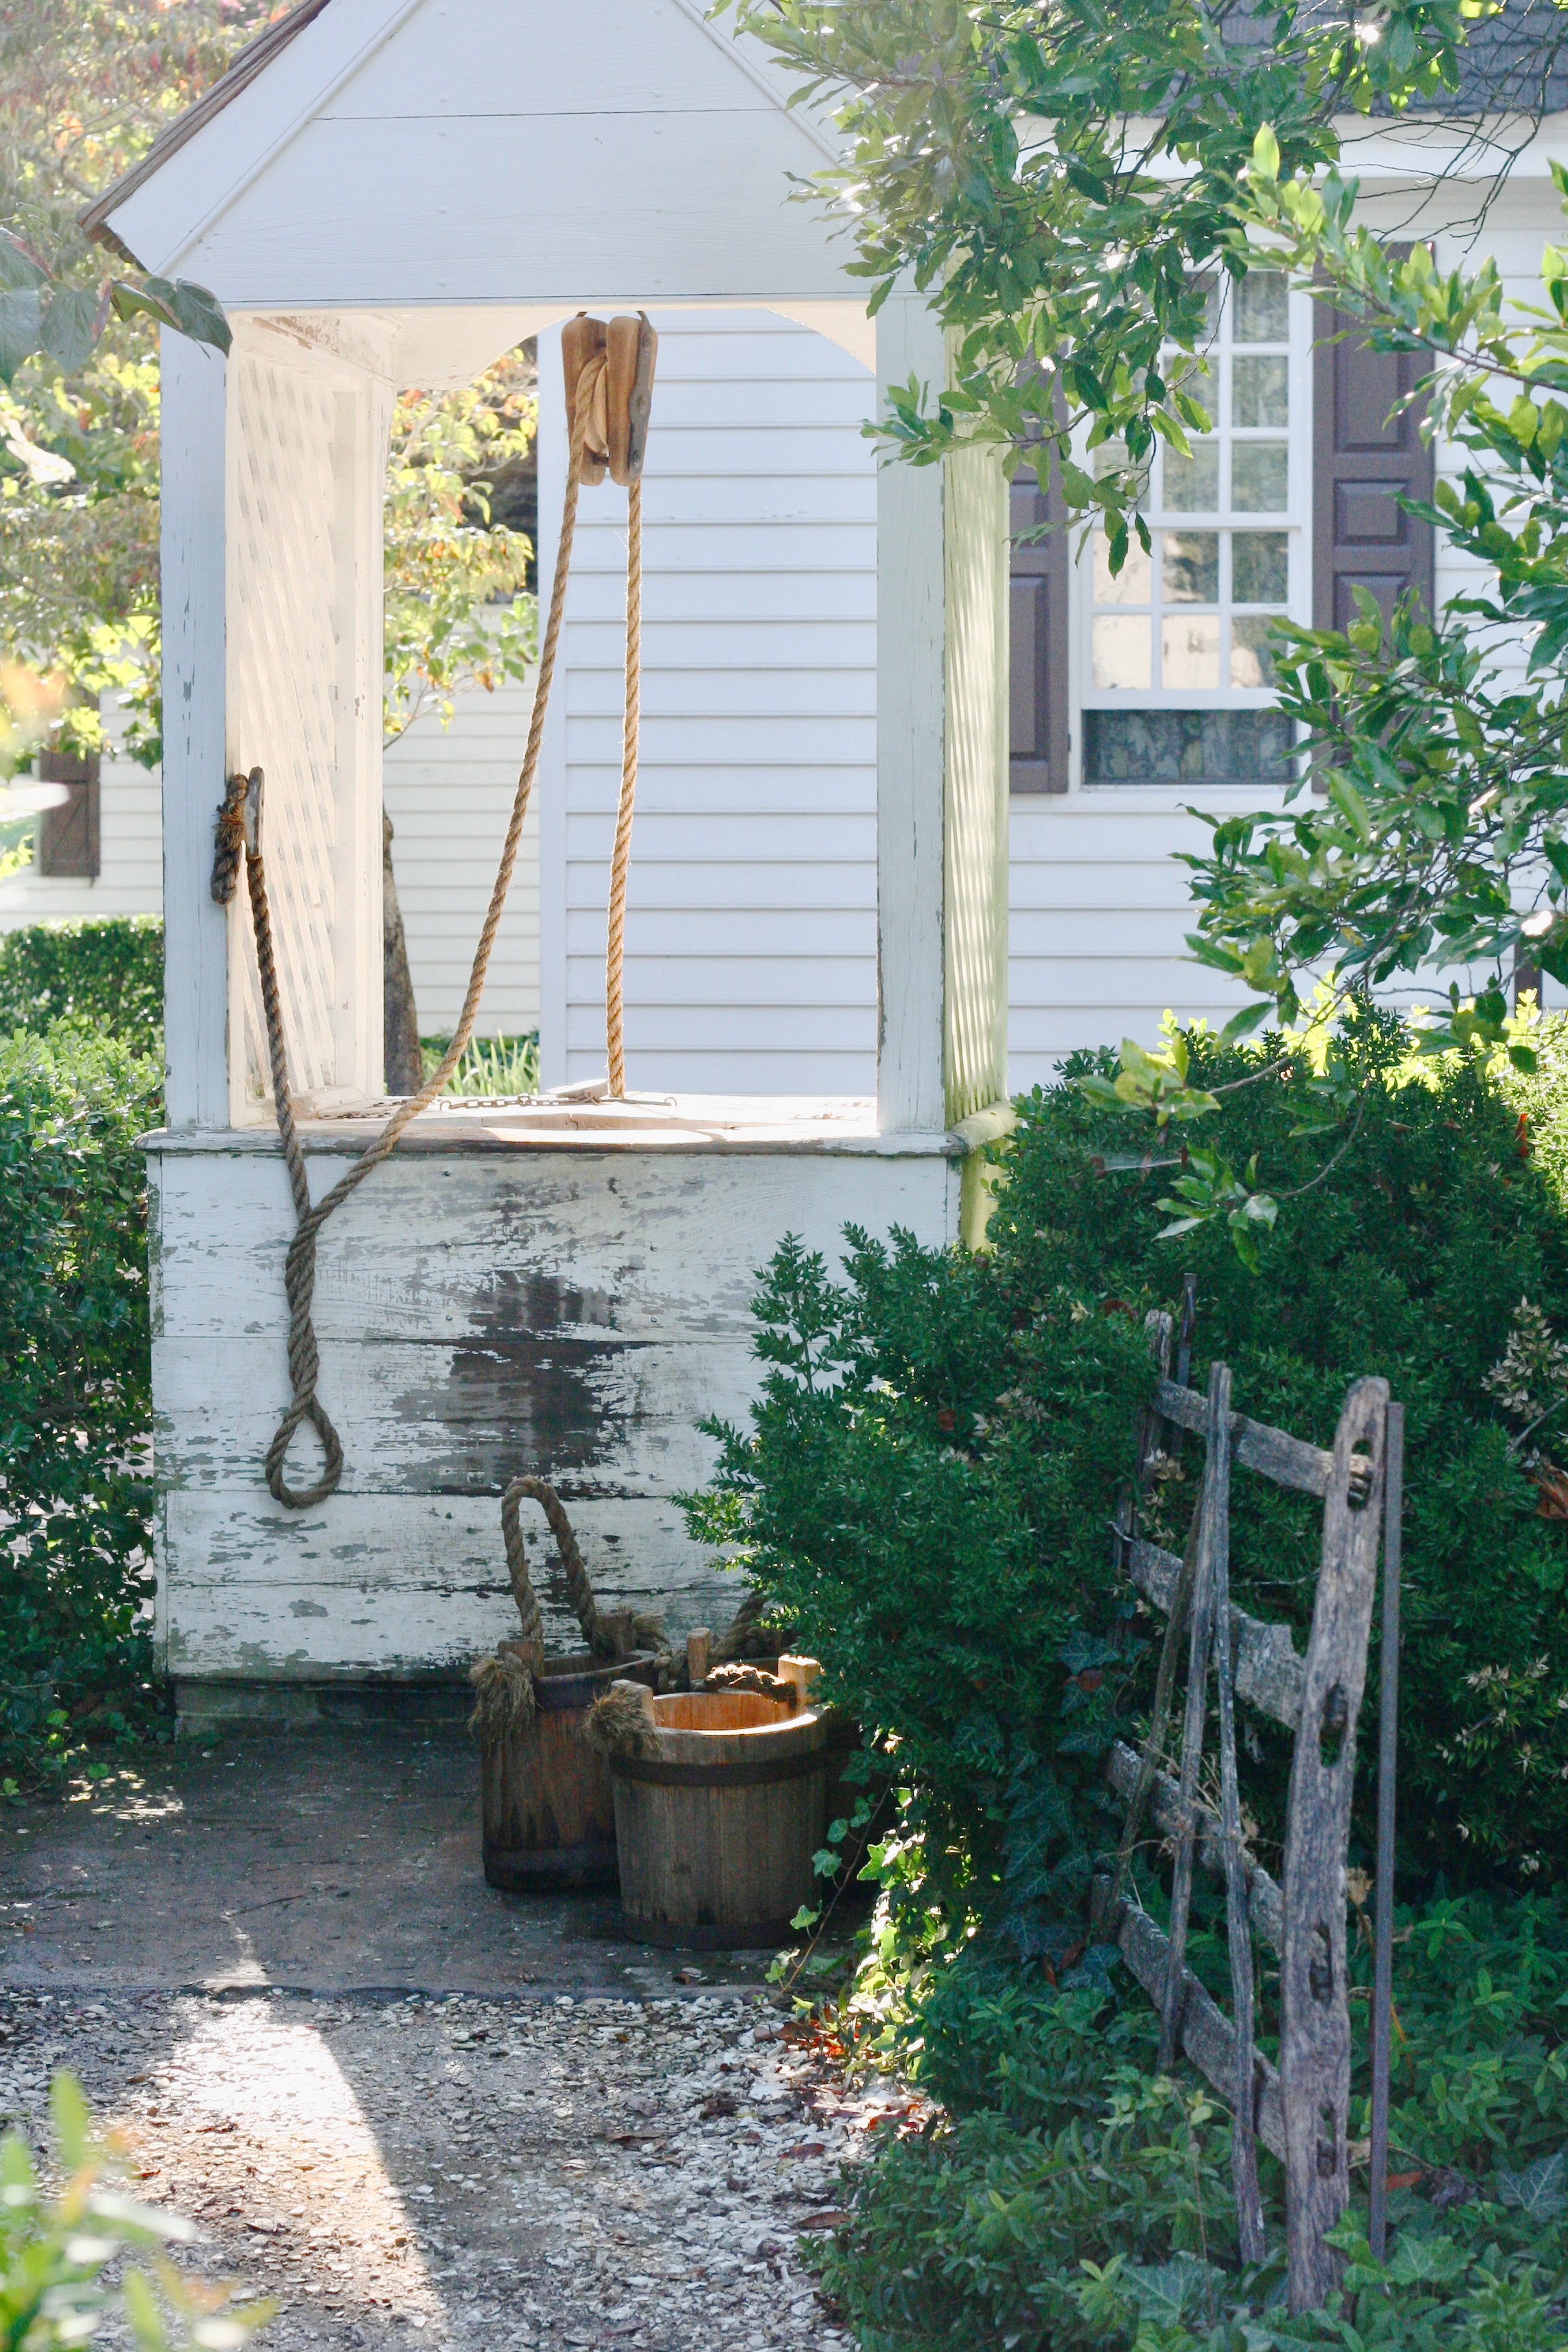 Rustic well in cottage garden